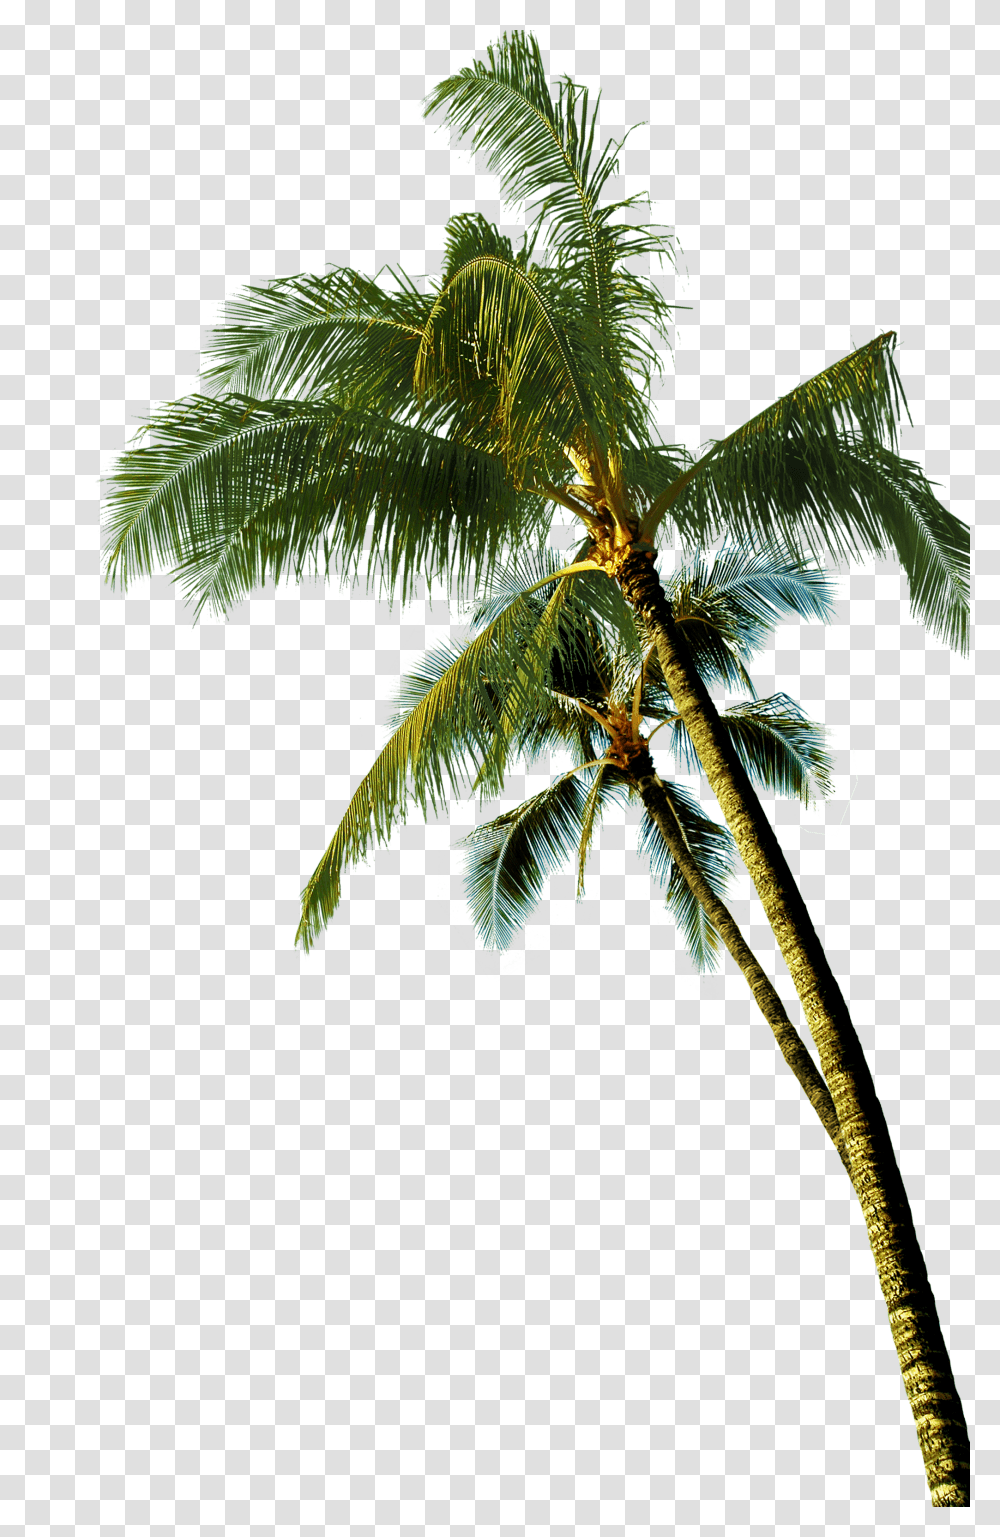 Coconut Asian Palmyra Palm Tree Background Coconut Tree Transparent Png